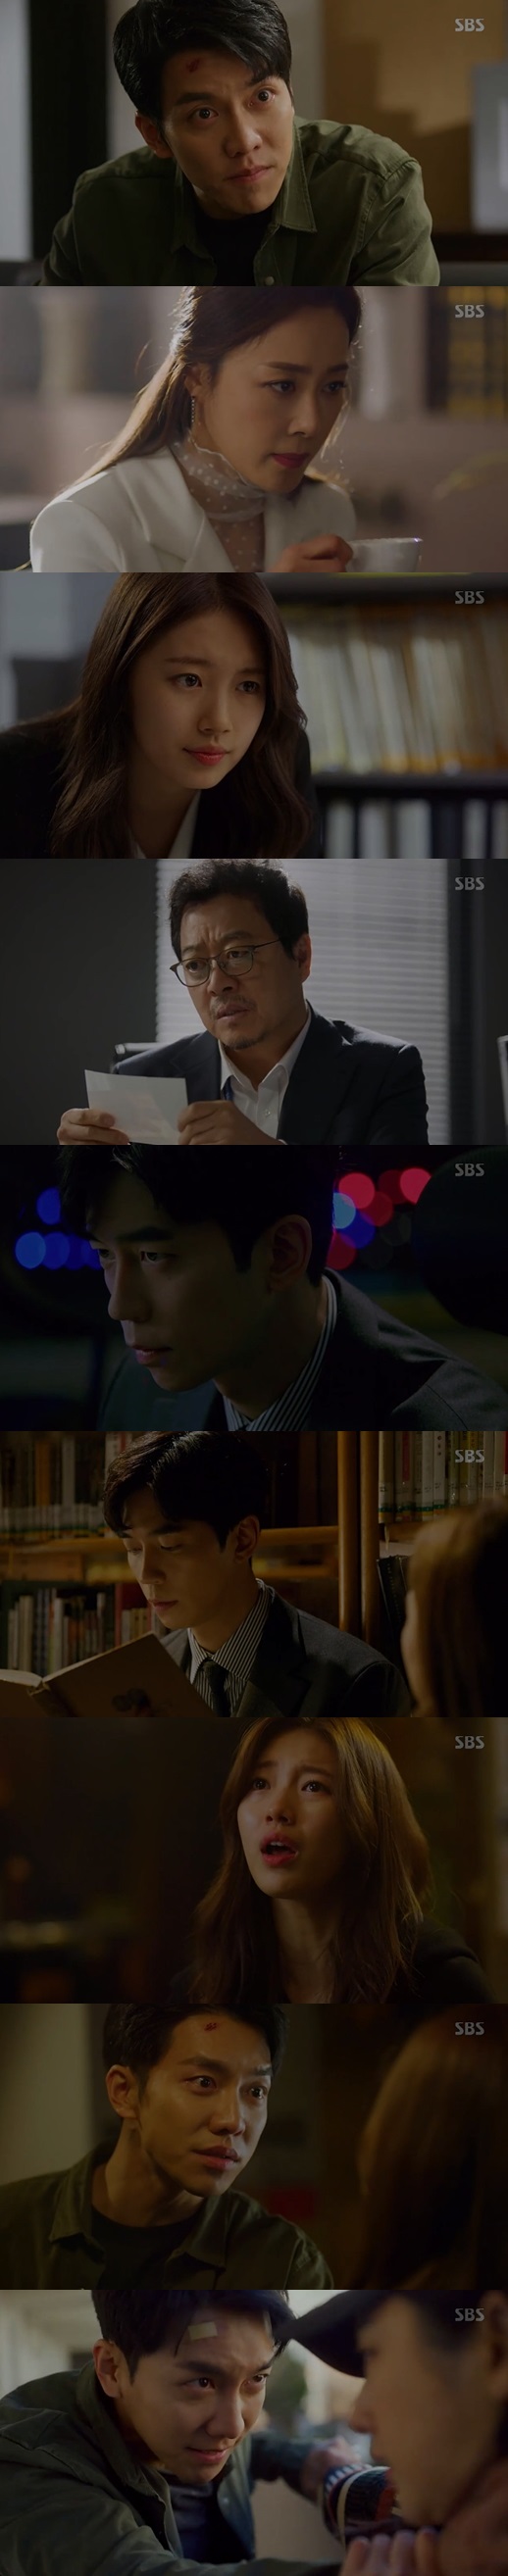 The Identity of the Vagabond shadow is gradually emerging.In the 5th episode of SBS gilt drama Vagabond (playplayed by Jang Young-chul, directed by Yoo In-sik), which was broadcast on the 4th night, Cha Dal-gun (Lee Seung-gi), who was protected by NIS, was portrayed.Chadalgan will face Jessica Lee (Moon Jin-hee).Chadalgan told Jessica Lee she had committed terrorism because of power and Jessica Lee responded, saying pain is holding you.I chose the other person completely, Cha Dal-gun warned, I will suck your bone marrow.He disobeyed Min Jae-siks order to stay still and visited Kang Ju-cheol (Lee Gi-young) to recommend Susa. Kang Ju-cheol was also questioning Michaels suicide and was in trouble.He then called the questioner and raised the issue, Michael was murdered.With the help of the Republican (Hwang Bo-ra), Gohari tried to secure the usb taken from the inspector general, but the usb was planted with the virus.Gitaewoong (Shin Sung-rok) was watching it all, and deleted CCTV footage of Goharis infiltration.Gitaewoong, who met Gohari, pretended not to know, reproached his reckless Susa will, but secretly secured the extra usb.Cha Dal-geon, who called out Ko Ha-ri, was enraged at the complacent NIS attitude. Ko Ha-ri said, Ive done all this and that.What do you want me to do when I cover it up? Nevertheless, Cha Dal-geon pressed, Have a sense of duty. Eventually, Gohari confessed the pain of his fathers death.They were struggling with their own suffering.The next morning, Ko Hae-ri urgently found Cha Dal-geon after hearing news that the president was meeting with a portion of the b357 bereaved family, but it was Killer Lily (Park Ain) who came to the Cha Dal-geon.Lily knocked out the chadalgun and the late- arriving confession chased the ambulance with the chadalgun, which also woke up and fought the Lily crowd.The car, which had been lucky to escape in an ambulance accident, drove to Blue House in Goharis car, which was not on the guest list and was not allowed to enter, but it was tricked into the main building.Although numerous bodyguards were caught, Prime Minister Hong Soon-jo (Moon Sung-geun) let him in. President Jungkook (Baek Yoon-sik) also pretended to welcome him.At this time, Cha Dal-gun said, Planes was not crashed but was terrorized. After revealing that the bookkeeper Kim Woo-ki had squeezed the terrorist and crashed Planes, he released a recording of the conversation between Goh Hae and Kitaoong.Blue House quickly became a mess and a report was made to the media. Jessica Lee was angry. Edward Park (Lee Kyung-young) was pleased.Ko Hae-ri resigned, but Min Jae-sik decided to ask, Jungkook Pyo and Hong Soon-jo met Cha Dal-geon separately.Jungkook said, I cheer for courage, and Cha Dal-geon asked that Gohari and Kitaewoong not be fired.Chadalgan was impressed by the appearance of these Blue Houses, but Jungkook ordered the NIS chief to write his resignation.However, Hong Soon-jo conciliated that Jungkook should let him solve it himself.Gitaewoong and Gohari claimed to have leaked recordings of each other, but the case ended without the head of the NIS asking for responsibility.The confession apologized to Gitaewoong, but he left only the words good. The confession, which learned of Gitaewoongs intentions, was relieved.Jessica Lee waited for the veiled shadow and was surprised when she finally arrived. Yoon Han-ki (Kim Min-jong) handed the gum to Cha Dal-gun, who was protected by the NIS.